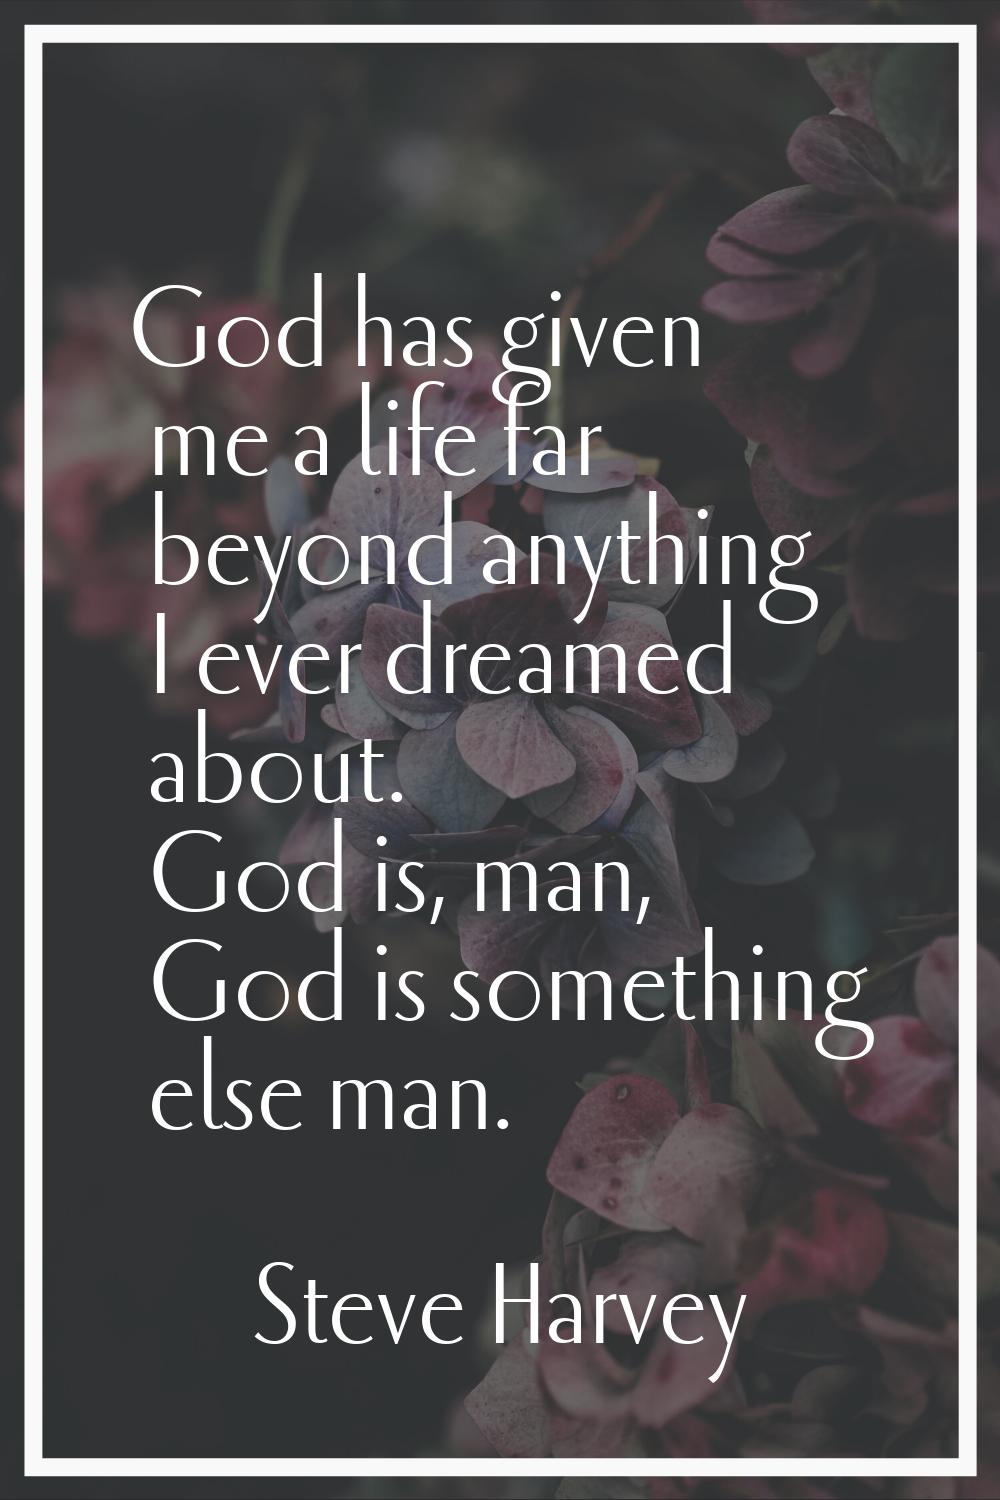 God has given me a life far beyond anything I ever dreamed about. God is, man, God is something els